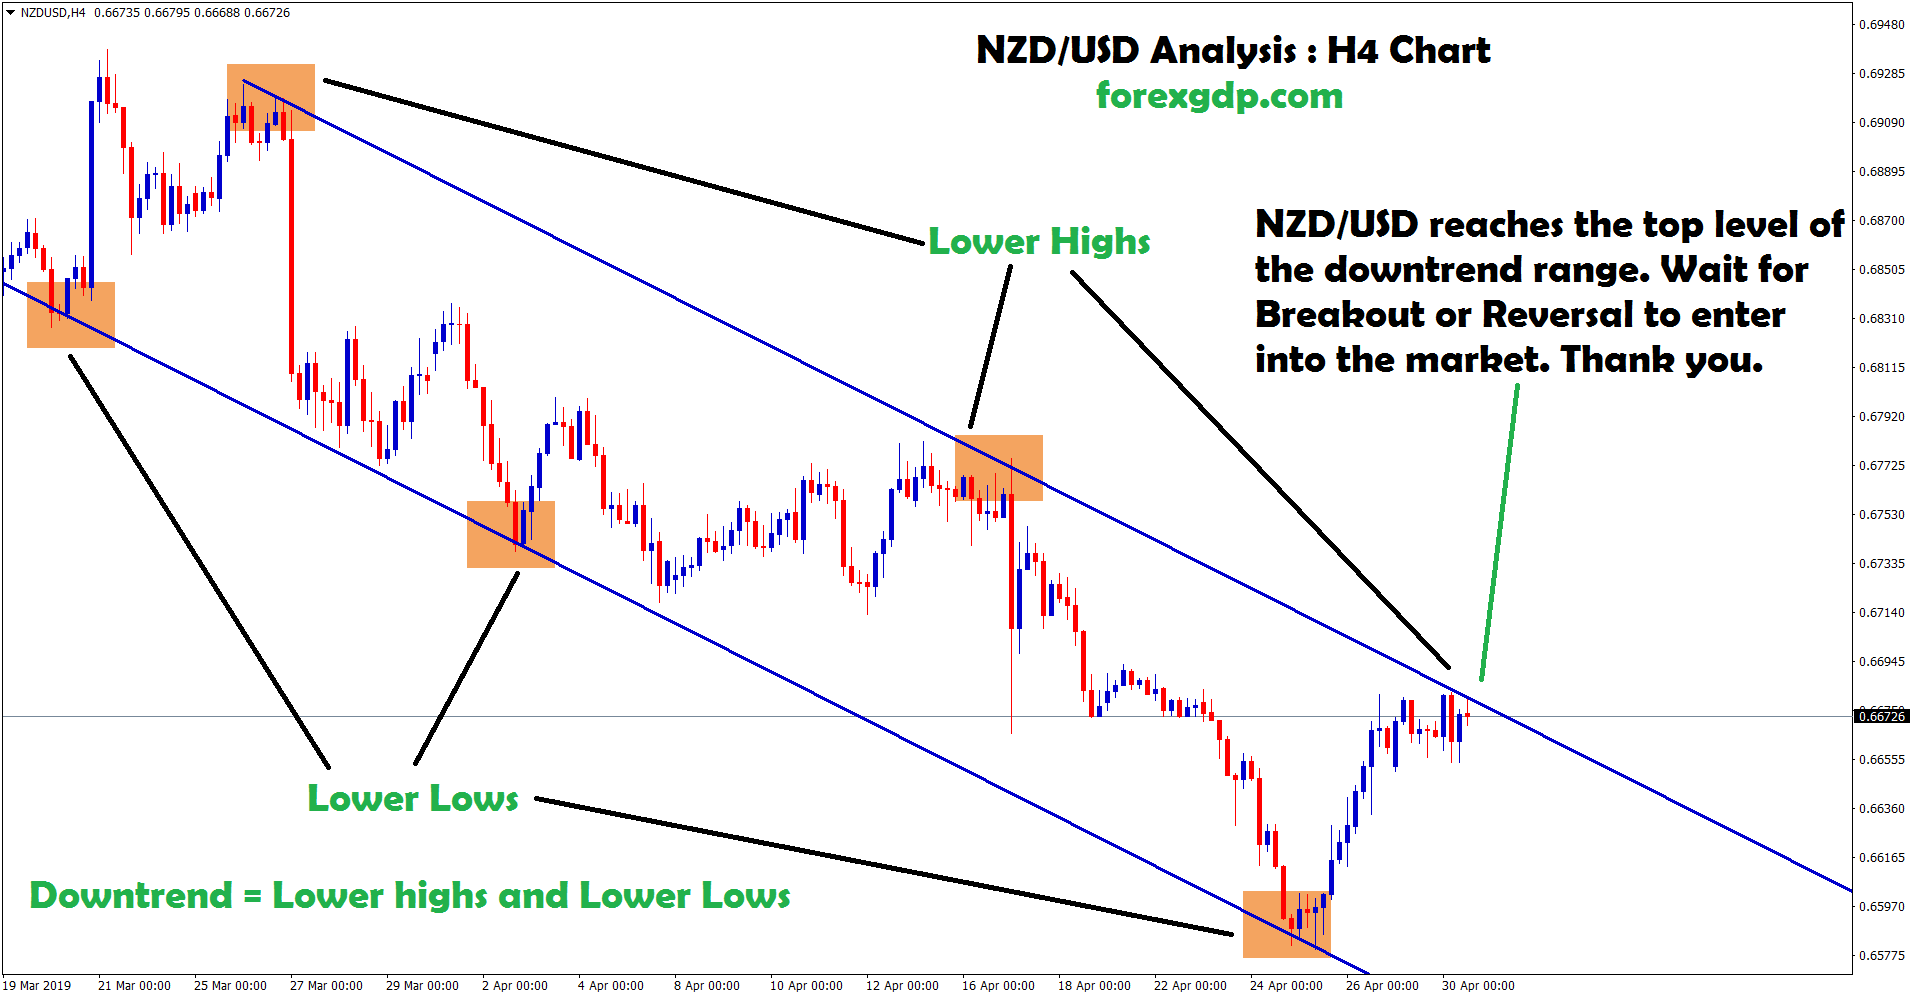 nzd/usd waiting for breakout or reversal